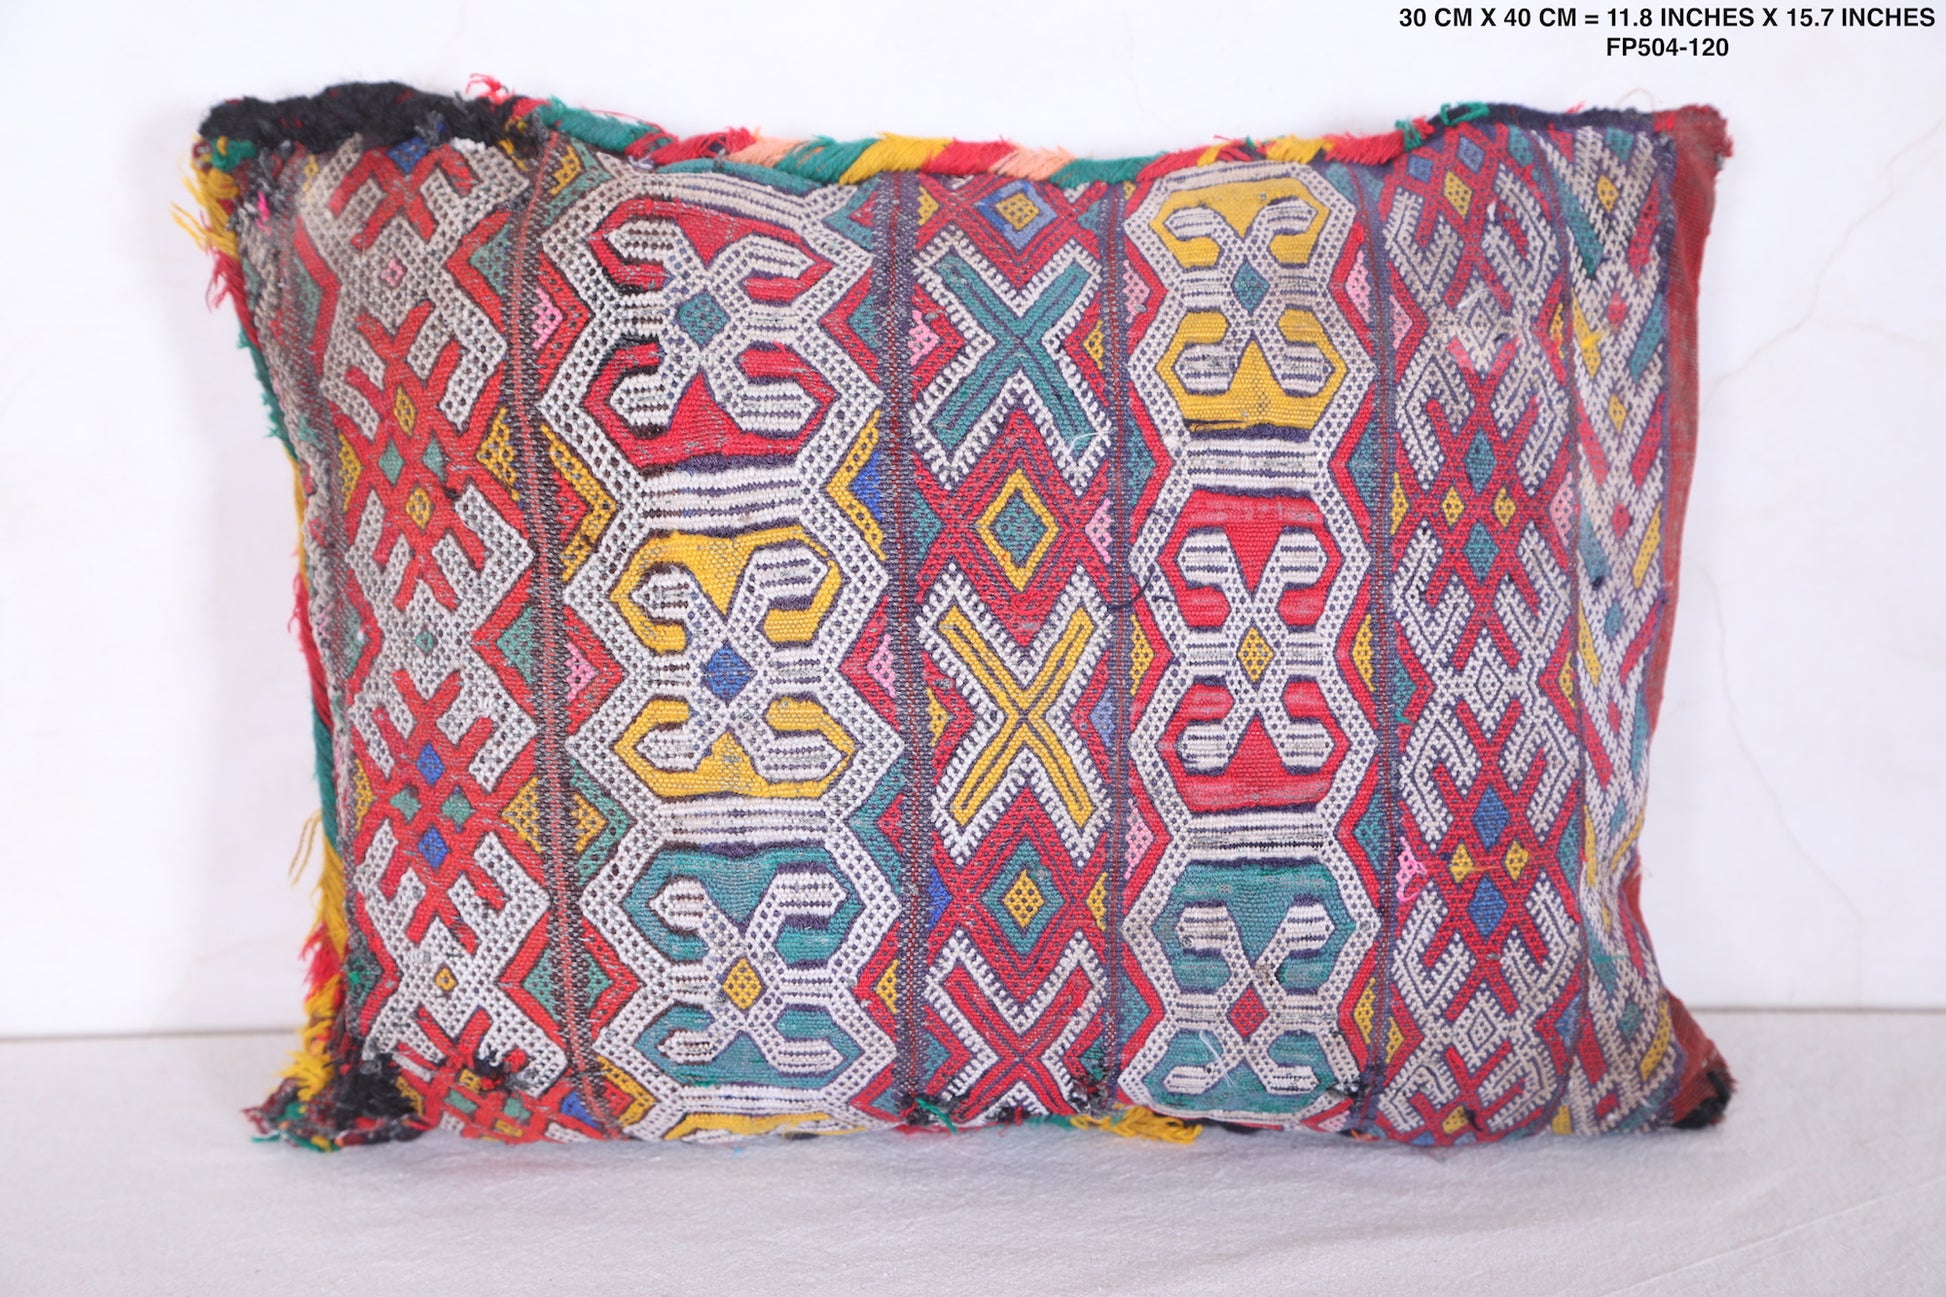 Moroccan handmade kilim pillow 11.8 INCHES X 15.7 INCHES